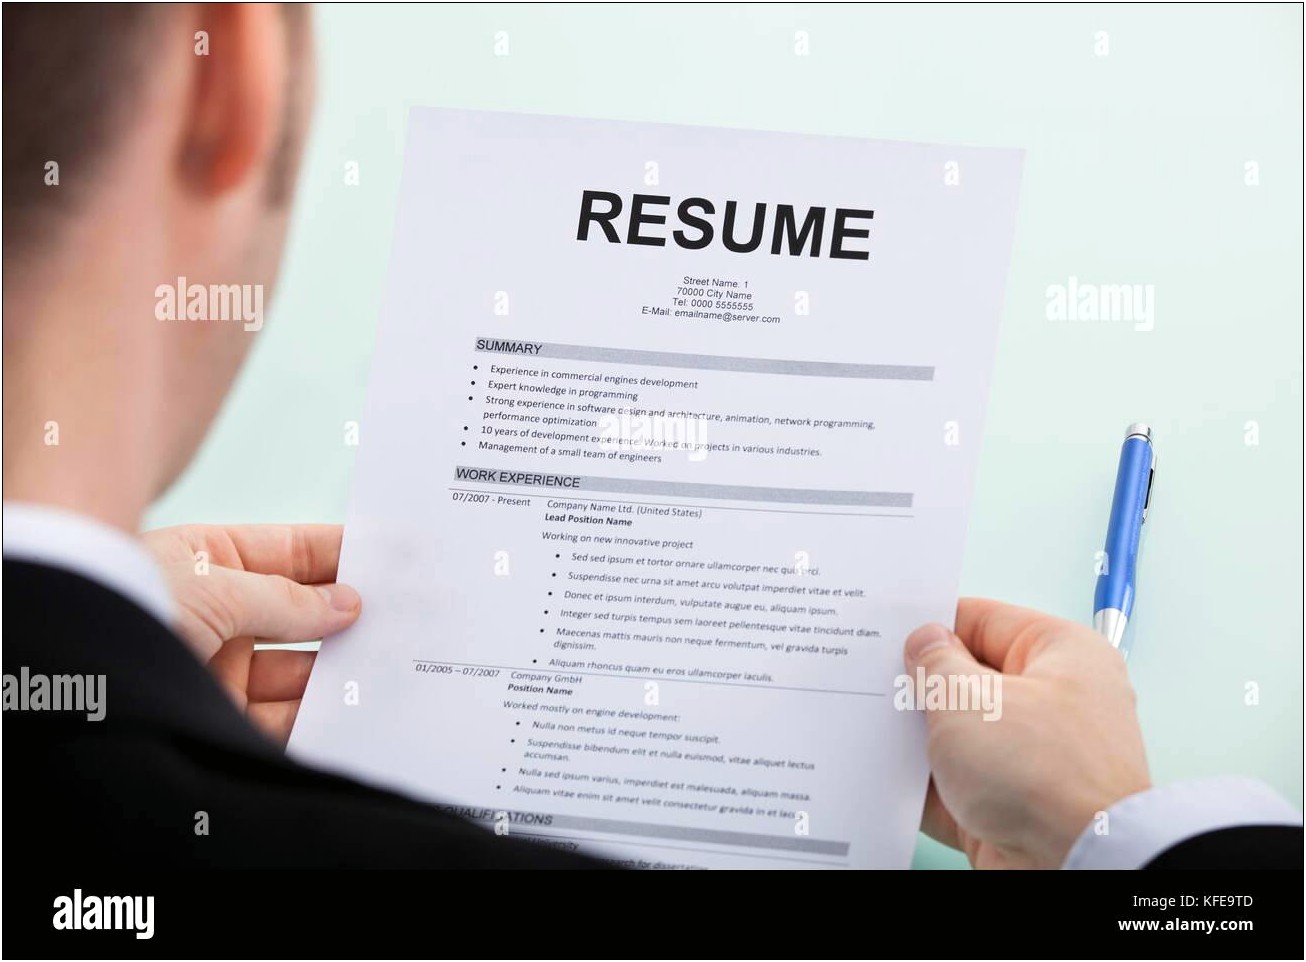 Inventory Management For Small Business On Resume